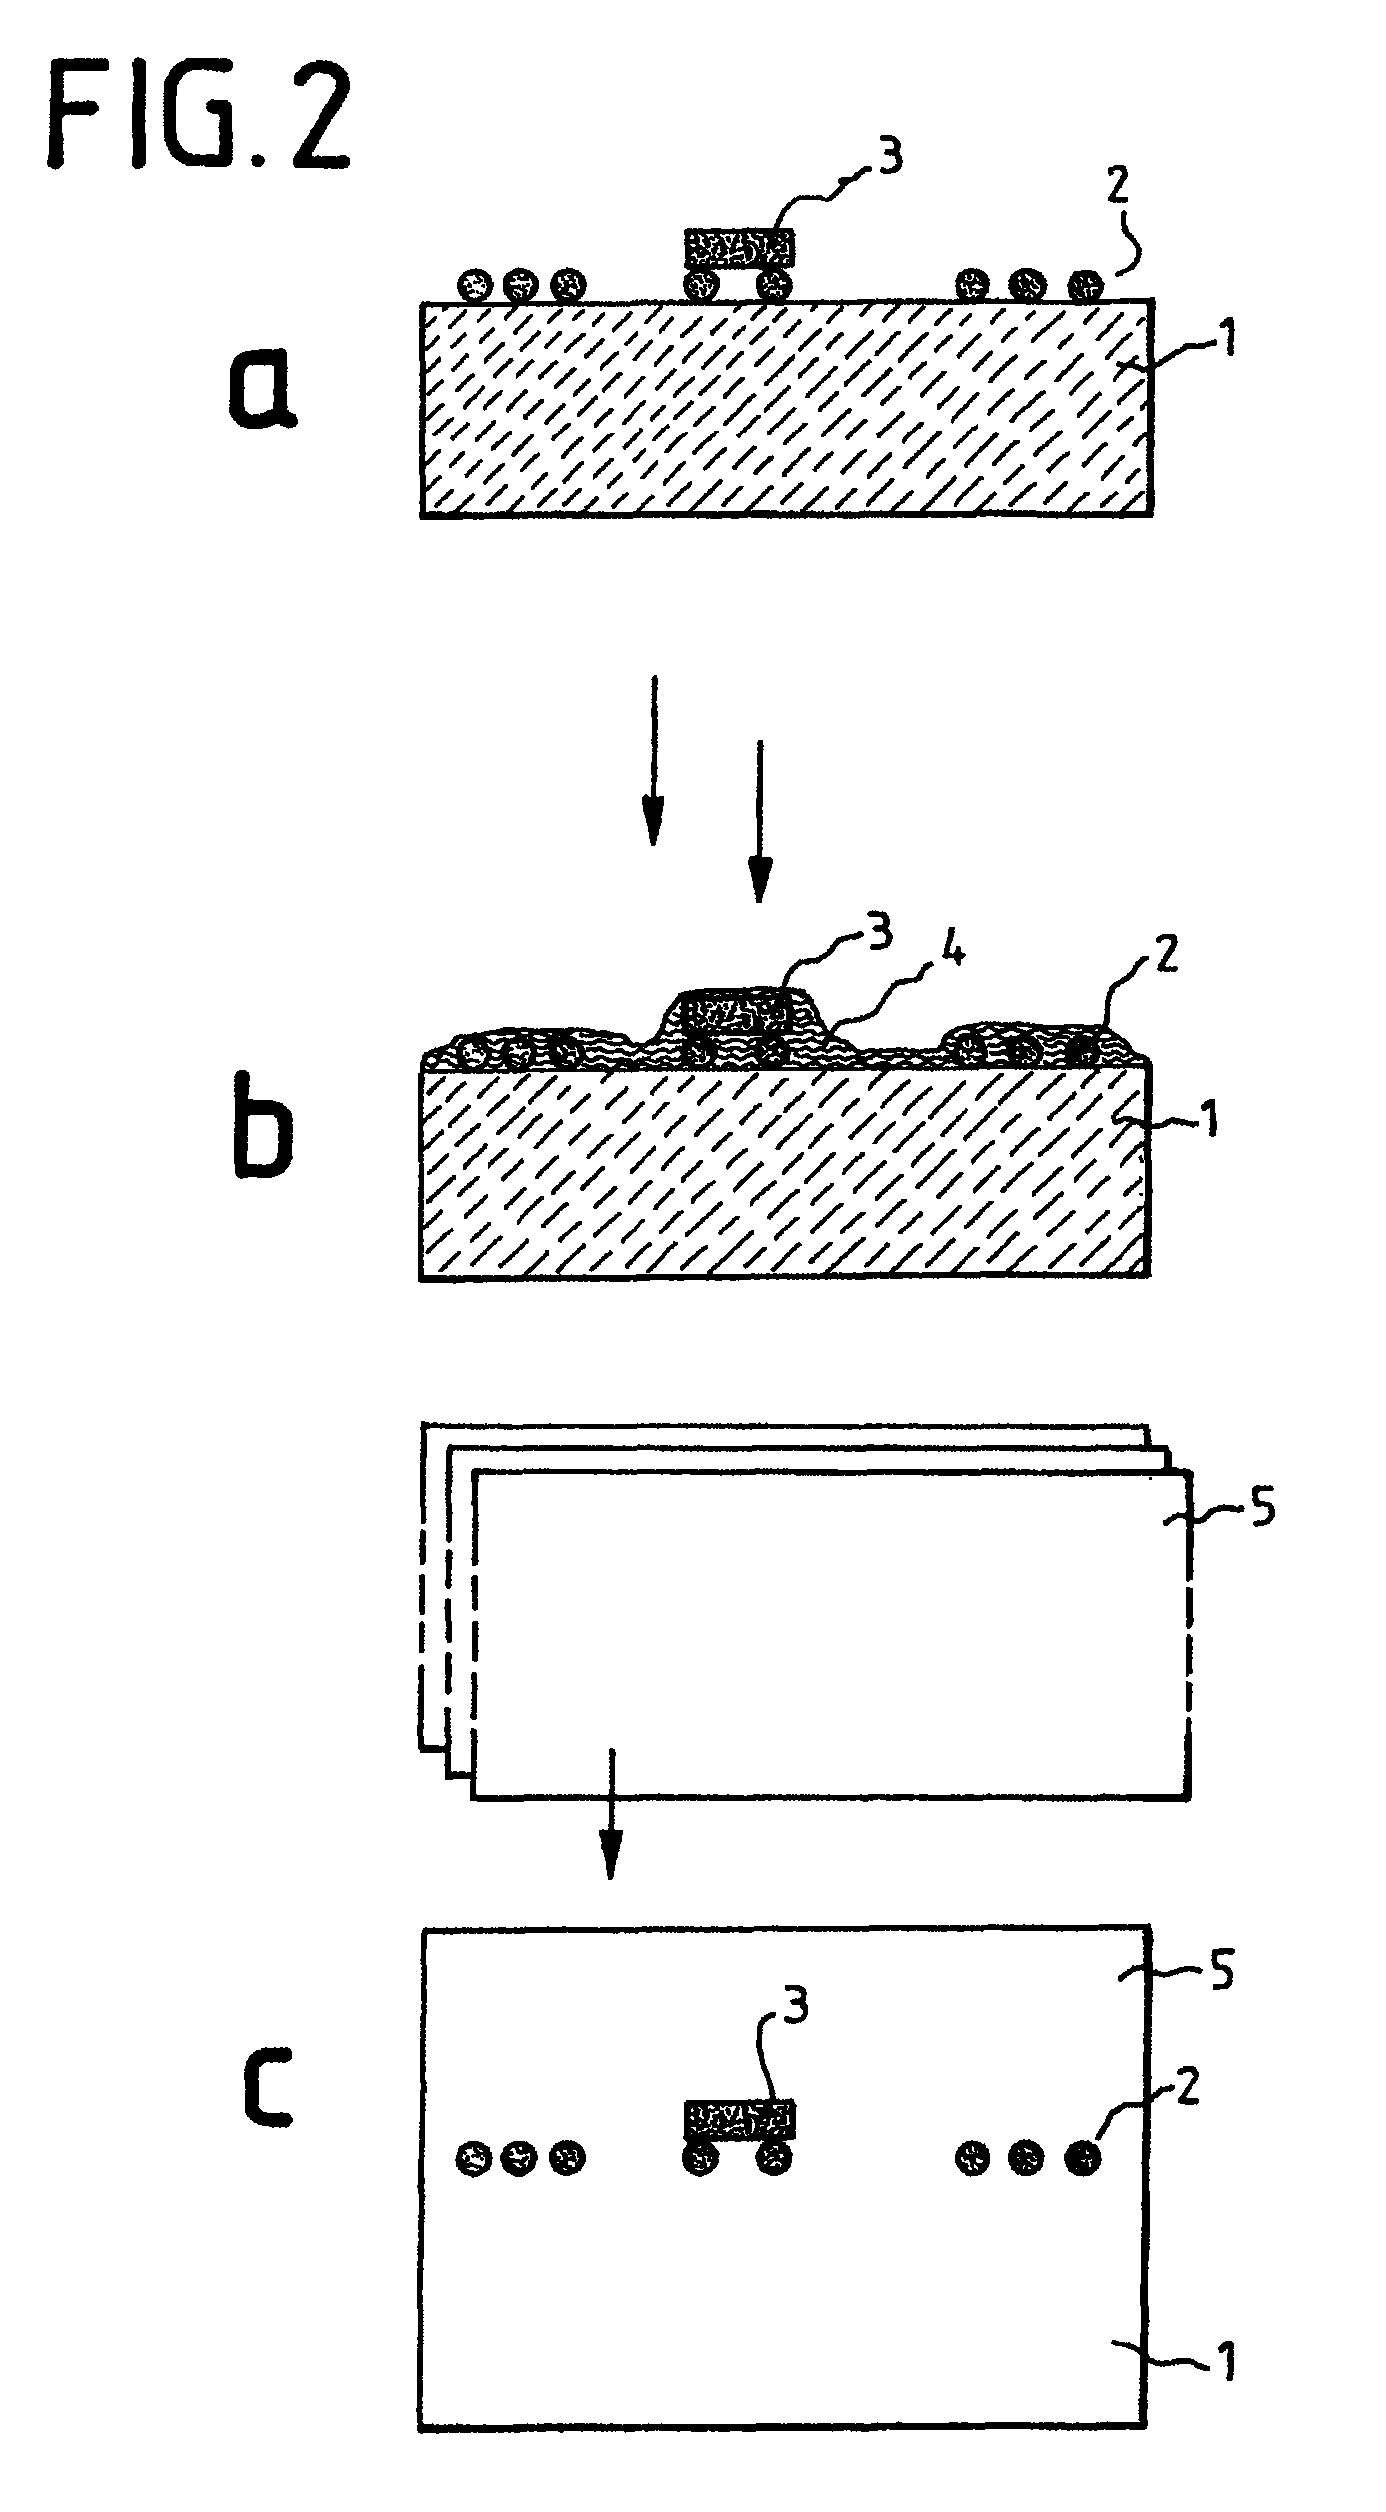 Method for producing a polycarbonate layered composite